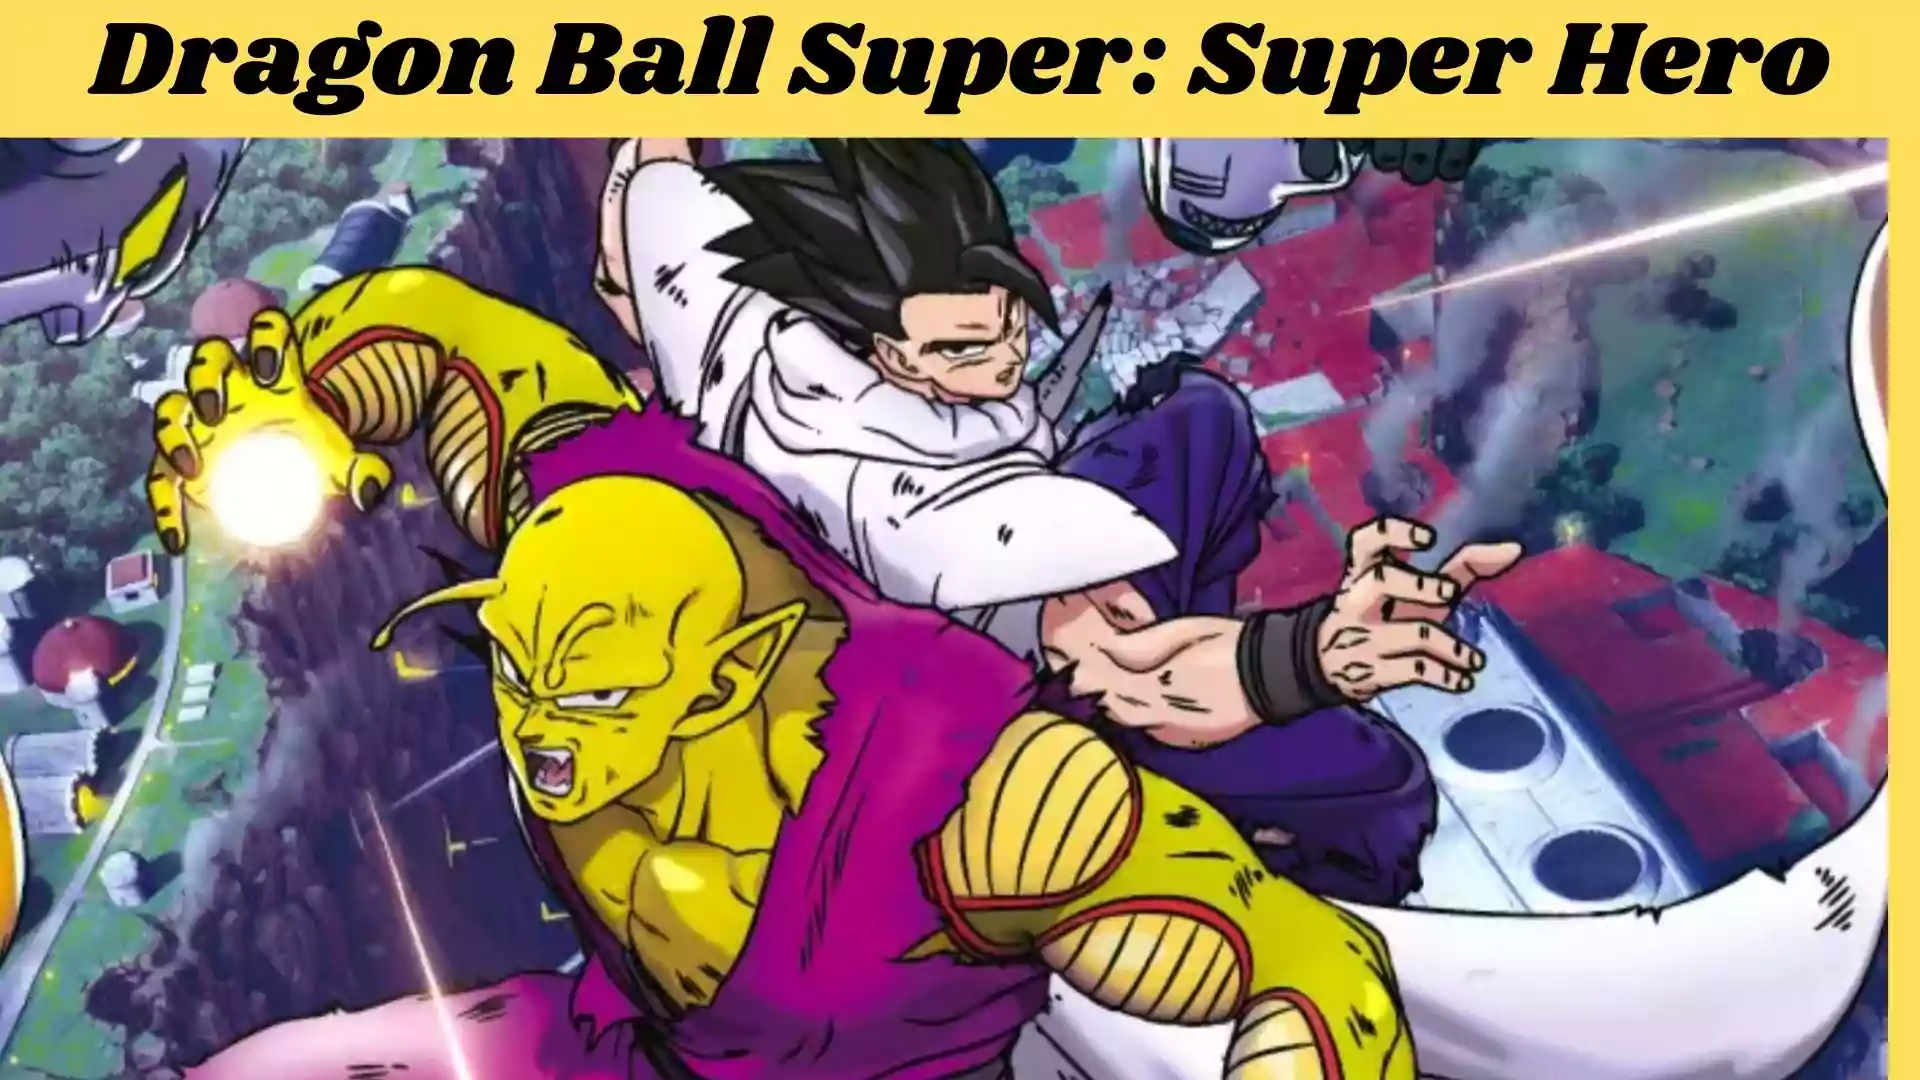 Dragon Ball Super: Super Hero Parents Guide and Age Rating | 2022